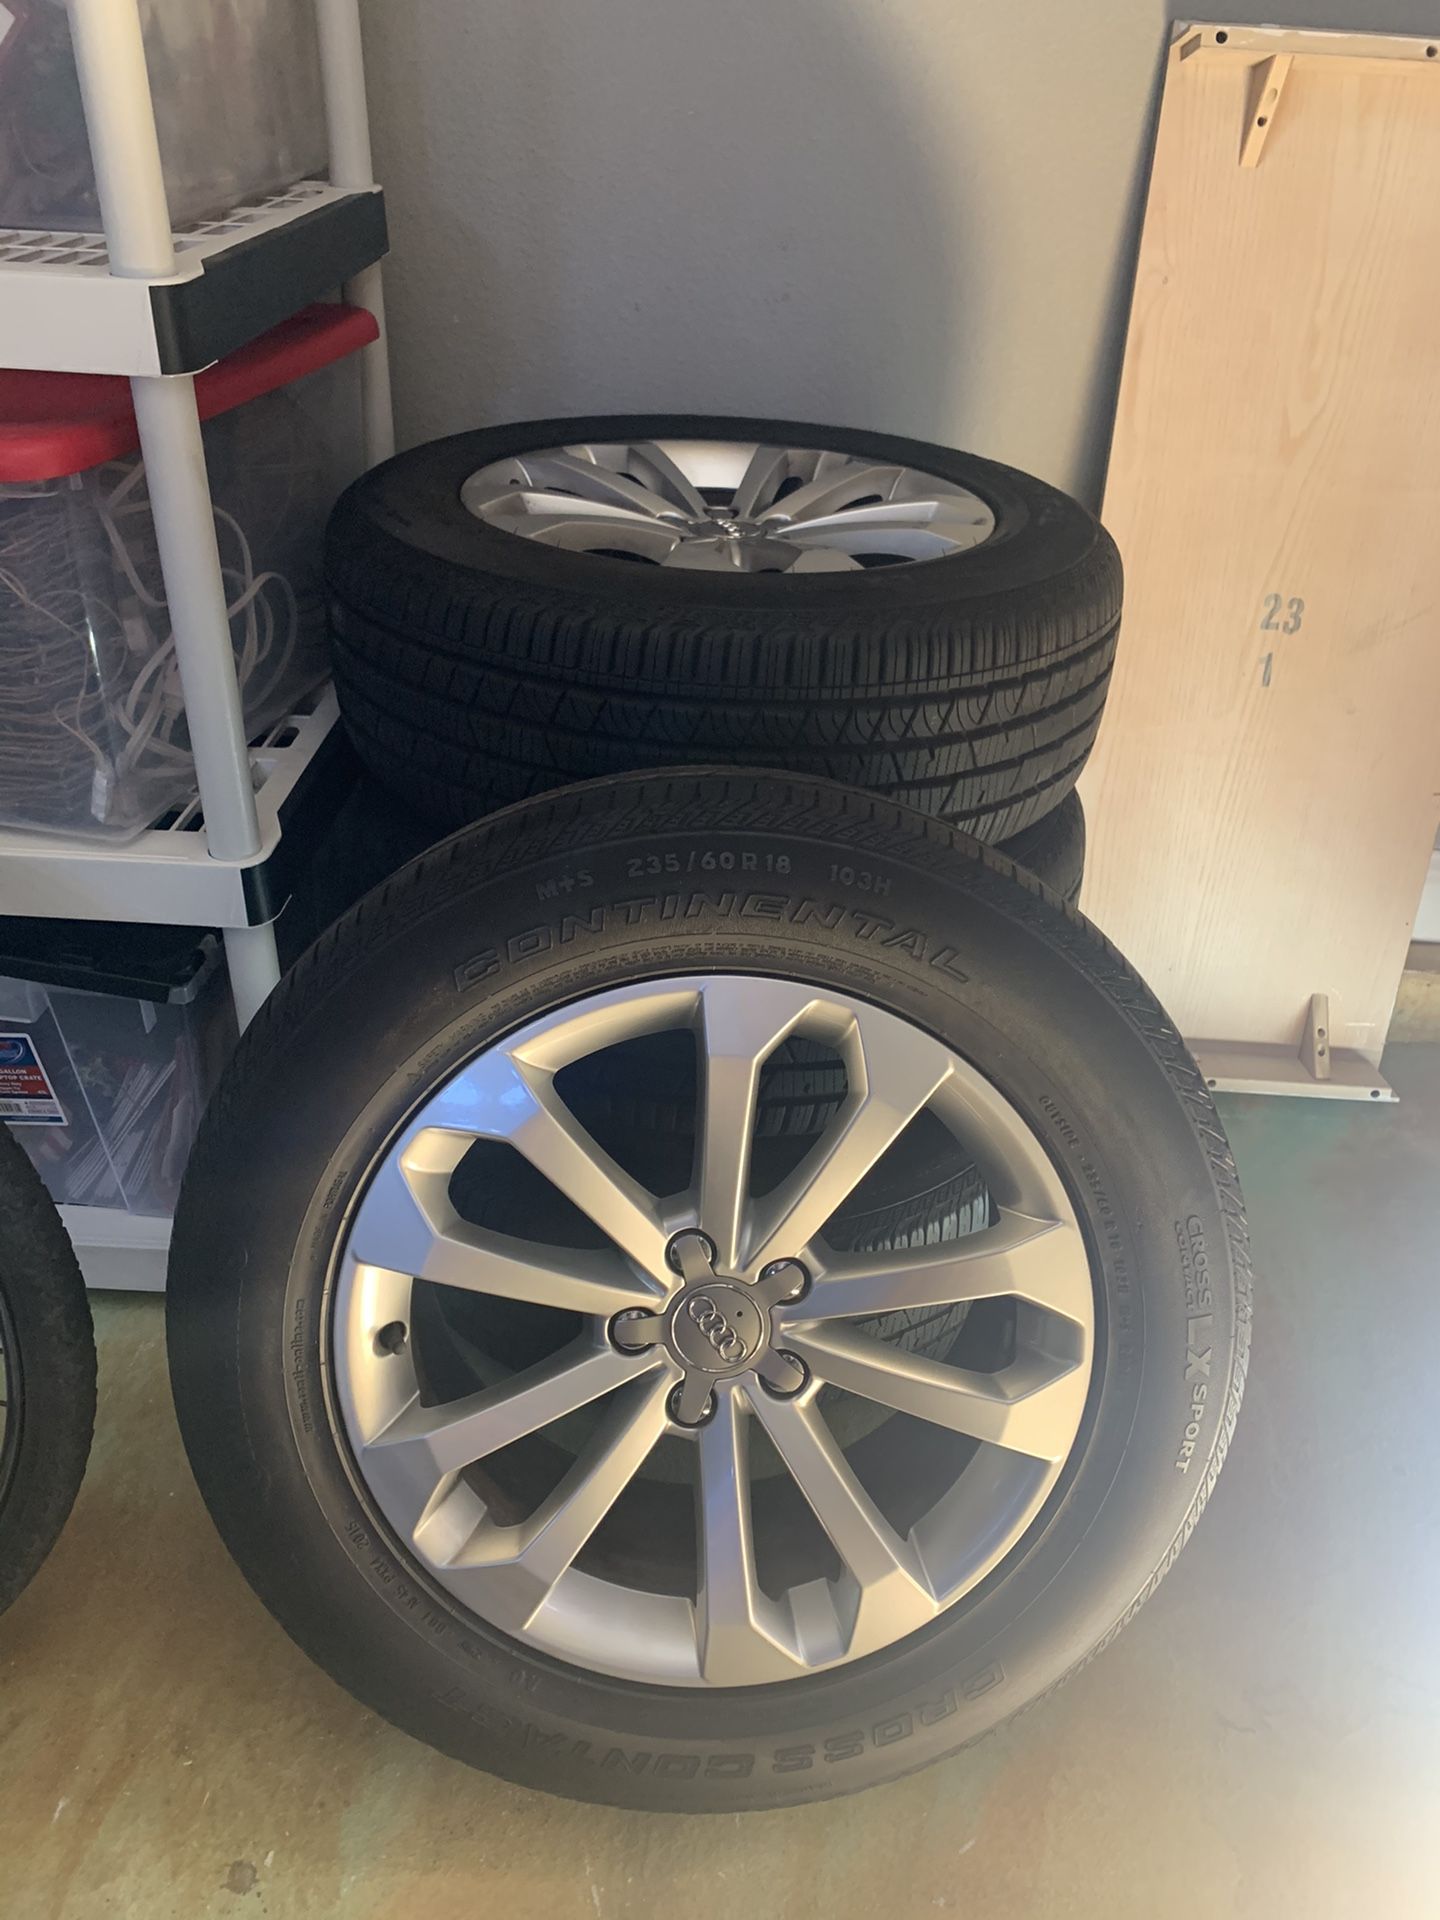 235/60R 18 stock rims and tires for Audi Q5